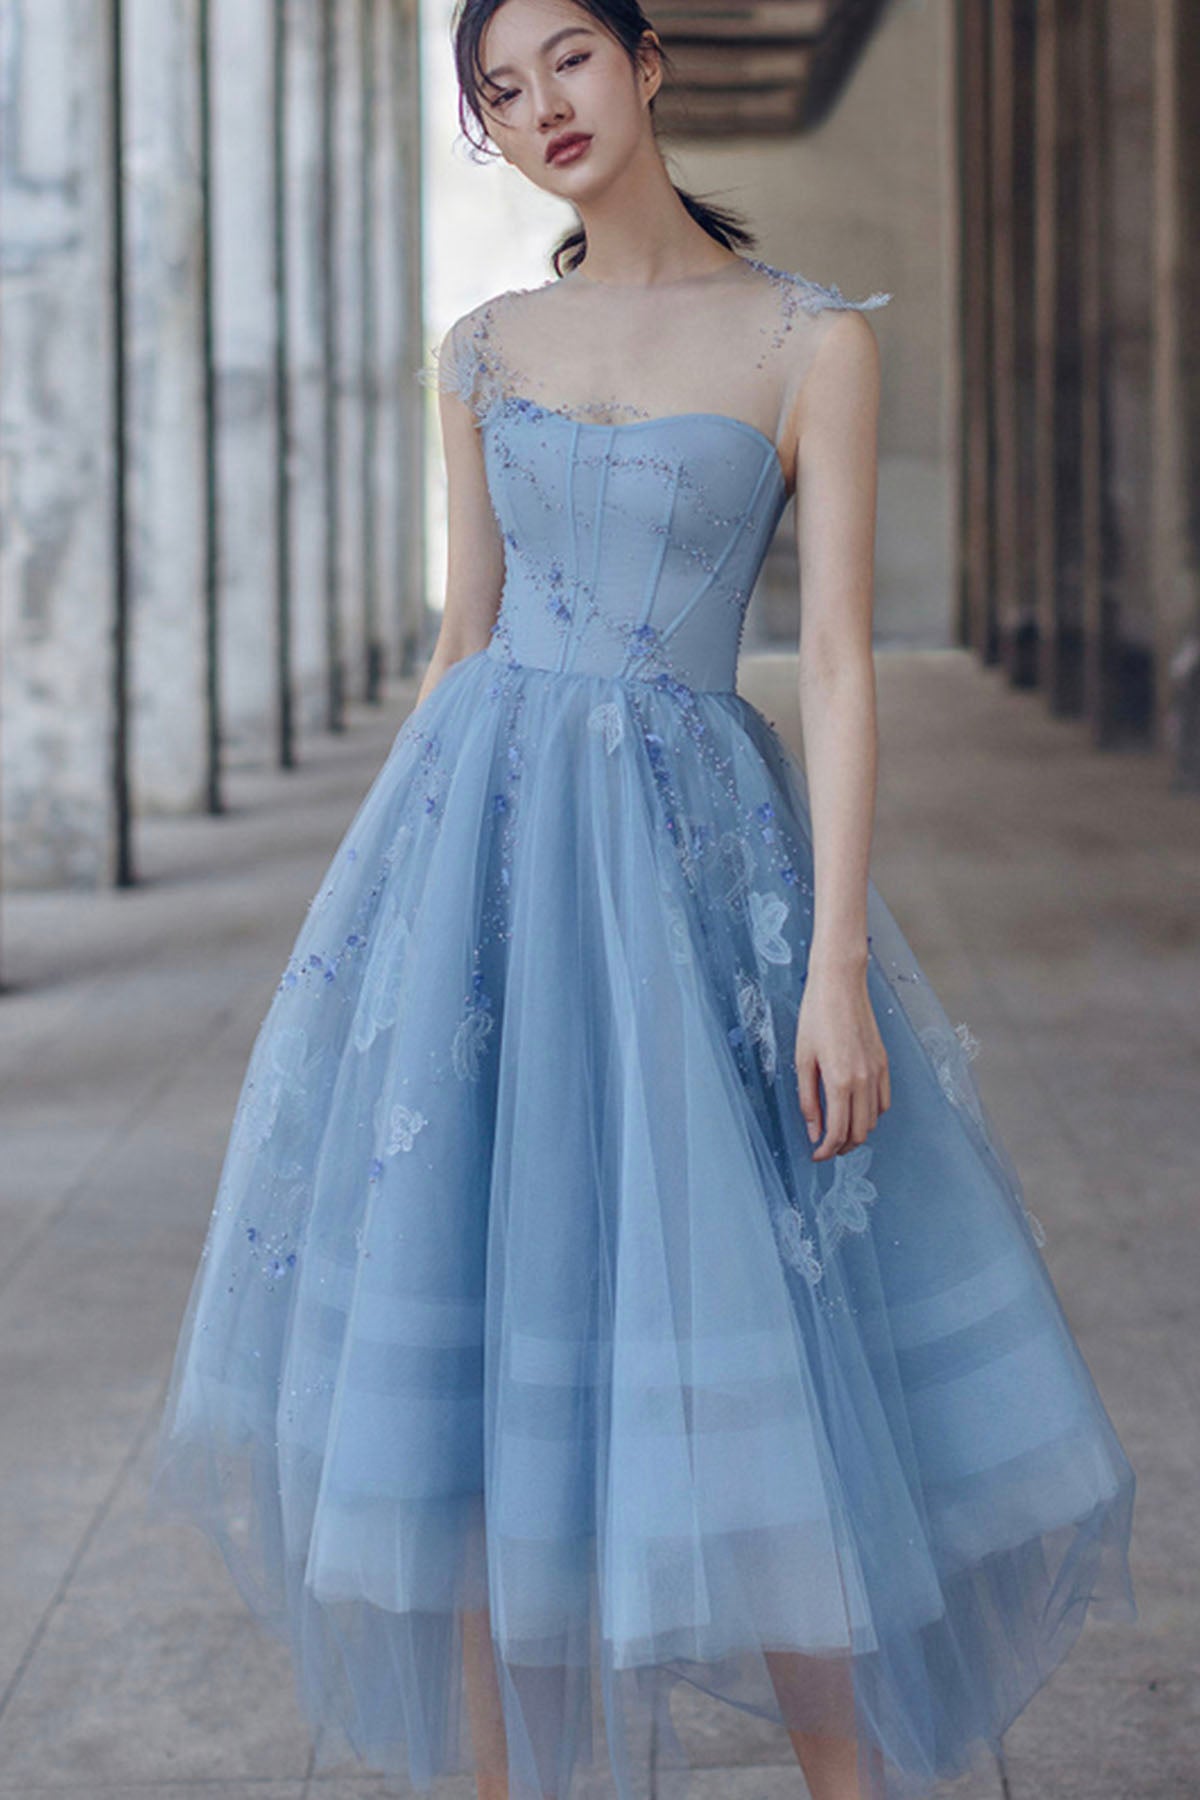 Blue Tulle Lace Short Prom Dress, Beautiful See Through Homecoming Party Dress